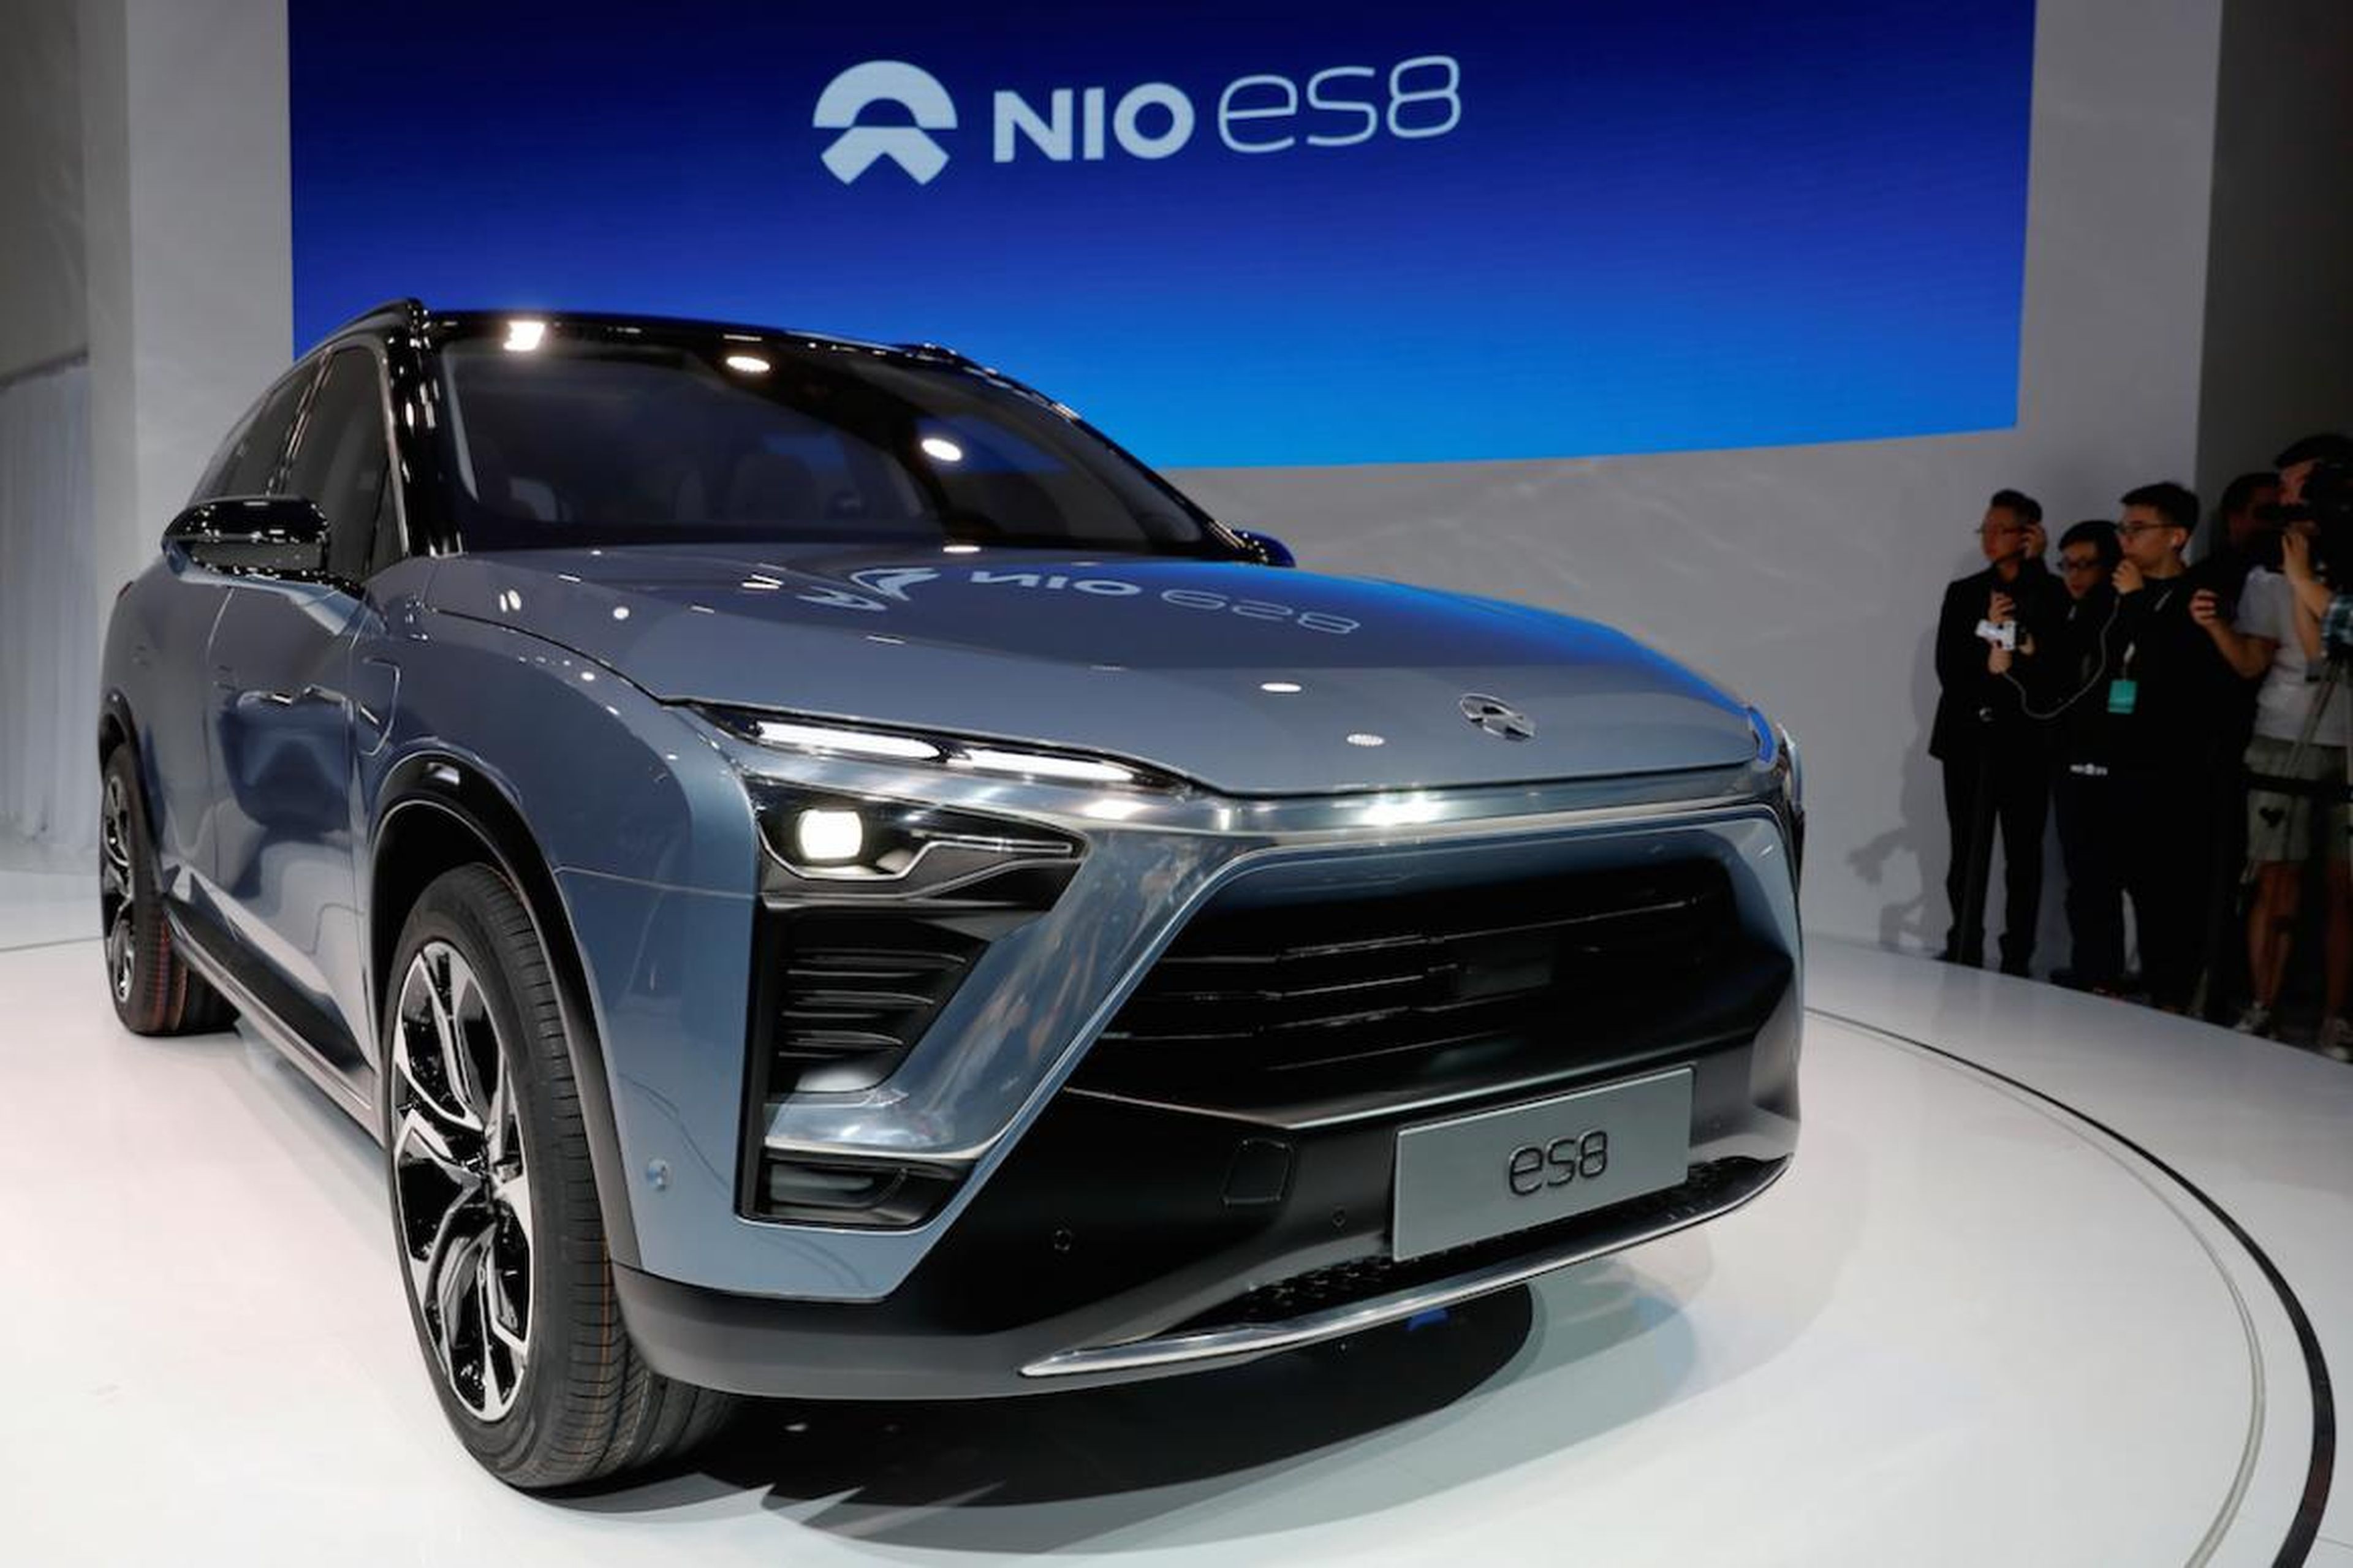 In December, Nio launched its first production car, the ES8, a seven-seat electric SUV with 220 miles of range. In June, it started shipping the cars to customers who preordered. It costs about $65,000 before subsidies provided by